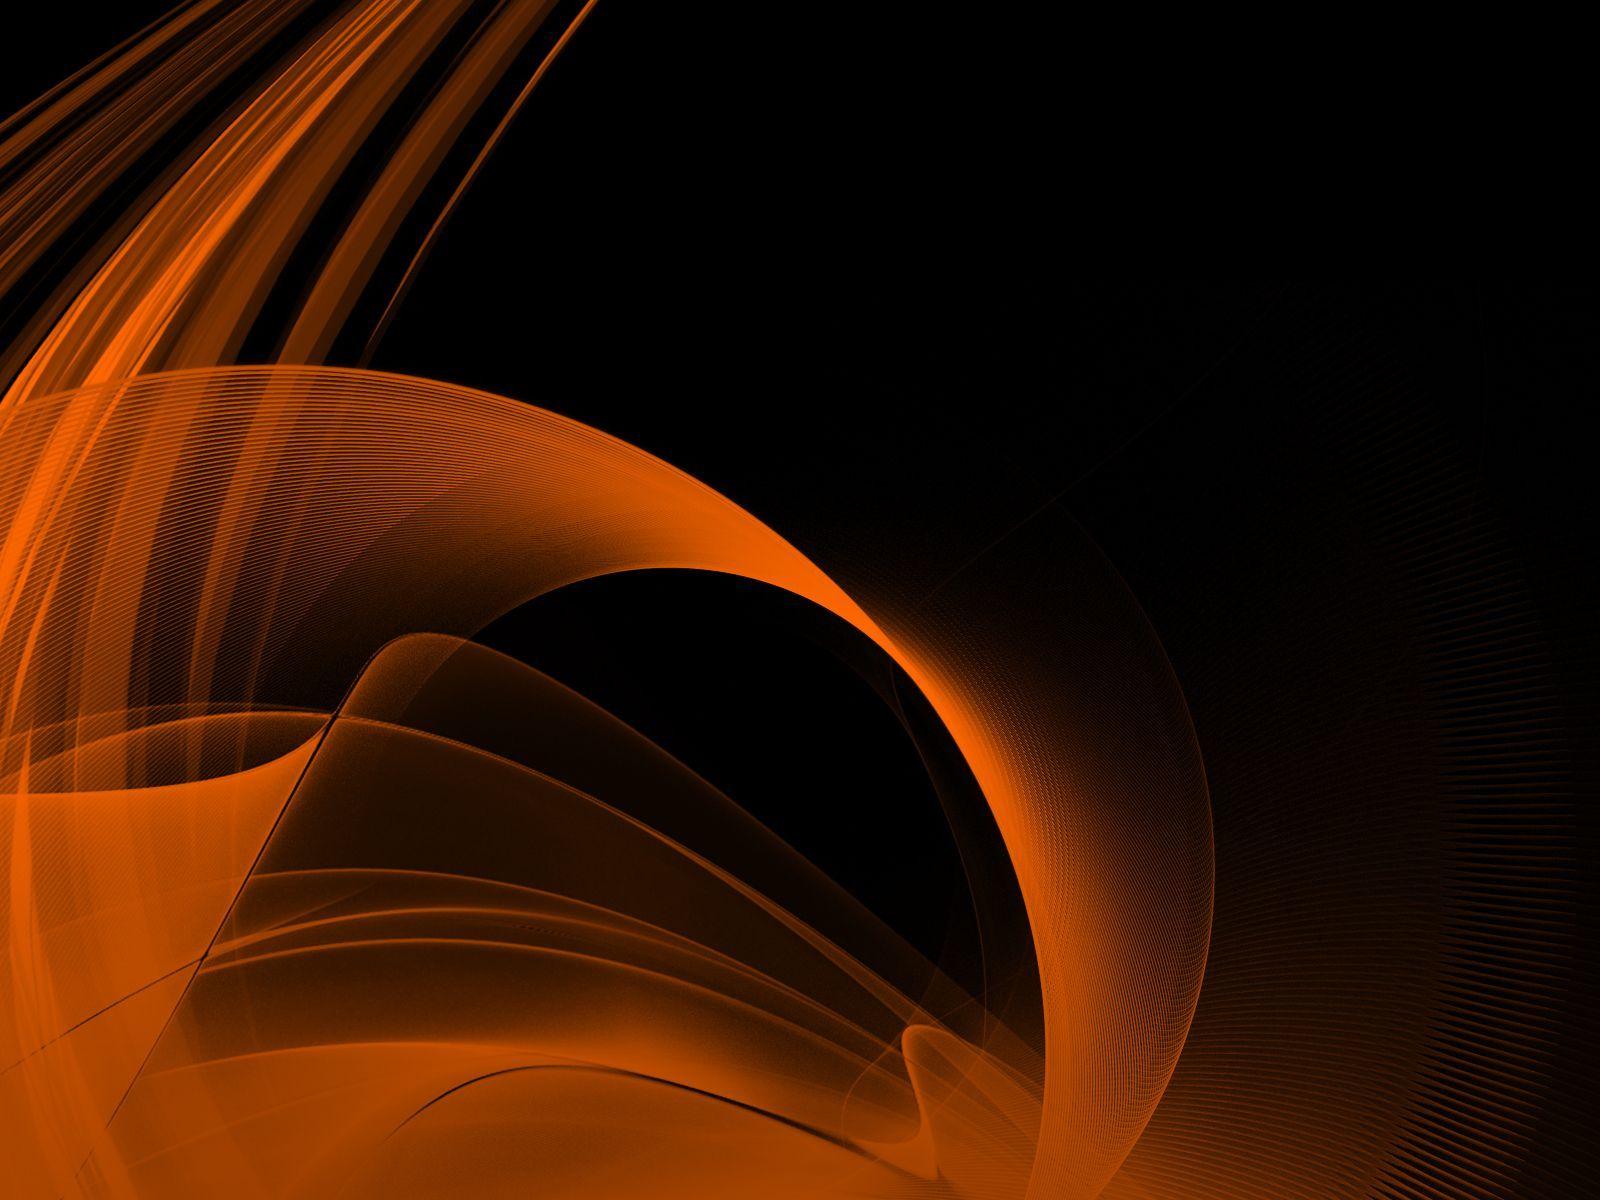 2389 Black And Orange Color Wallpaper In Hd. Village Of Coldwater